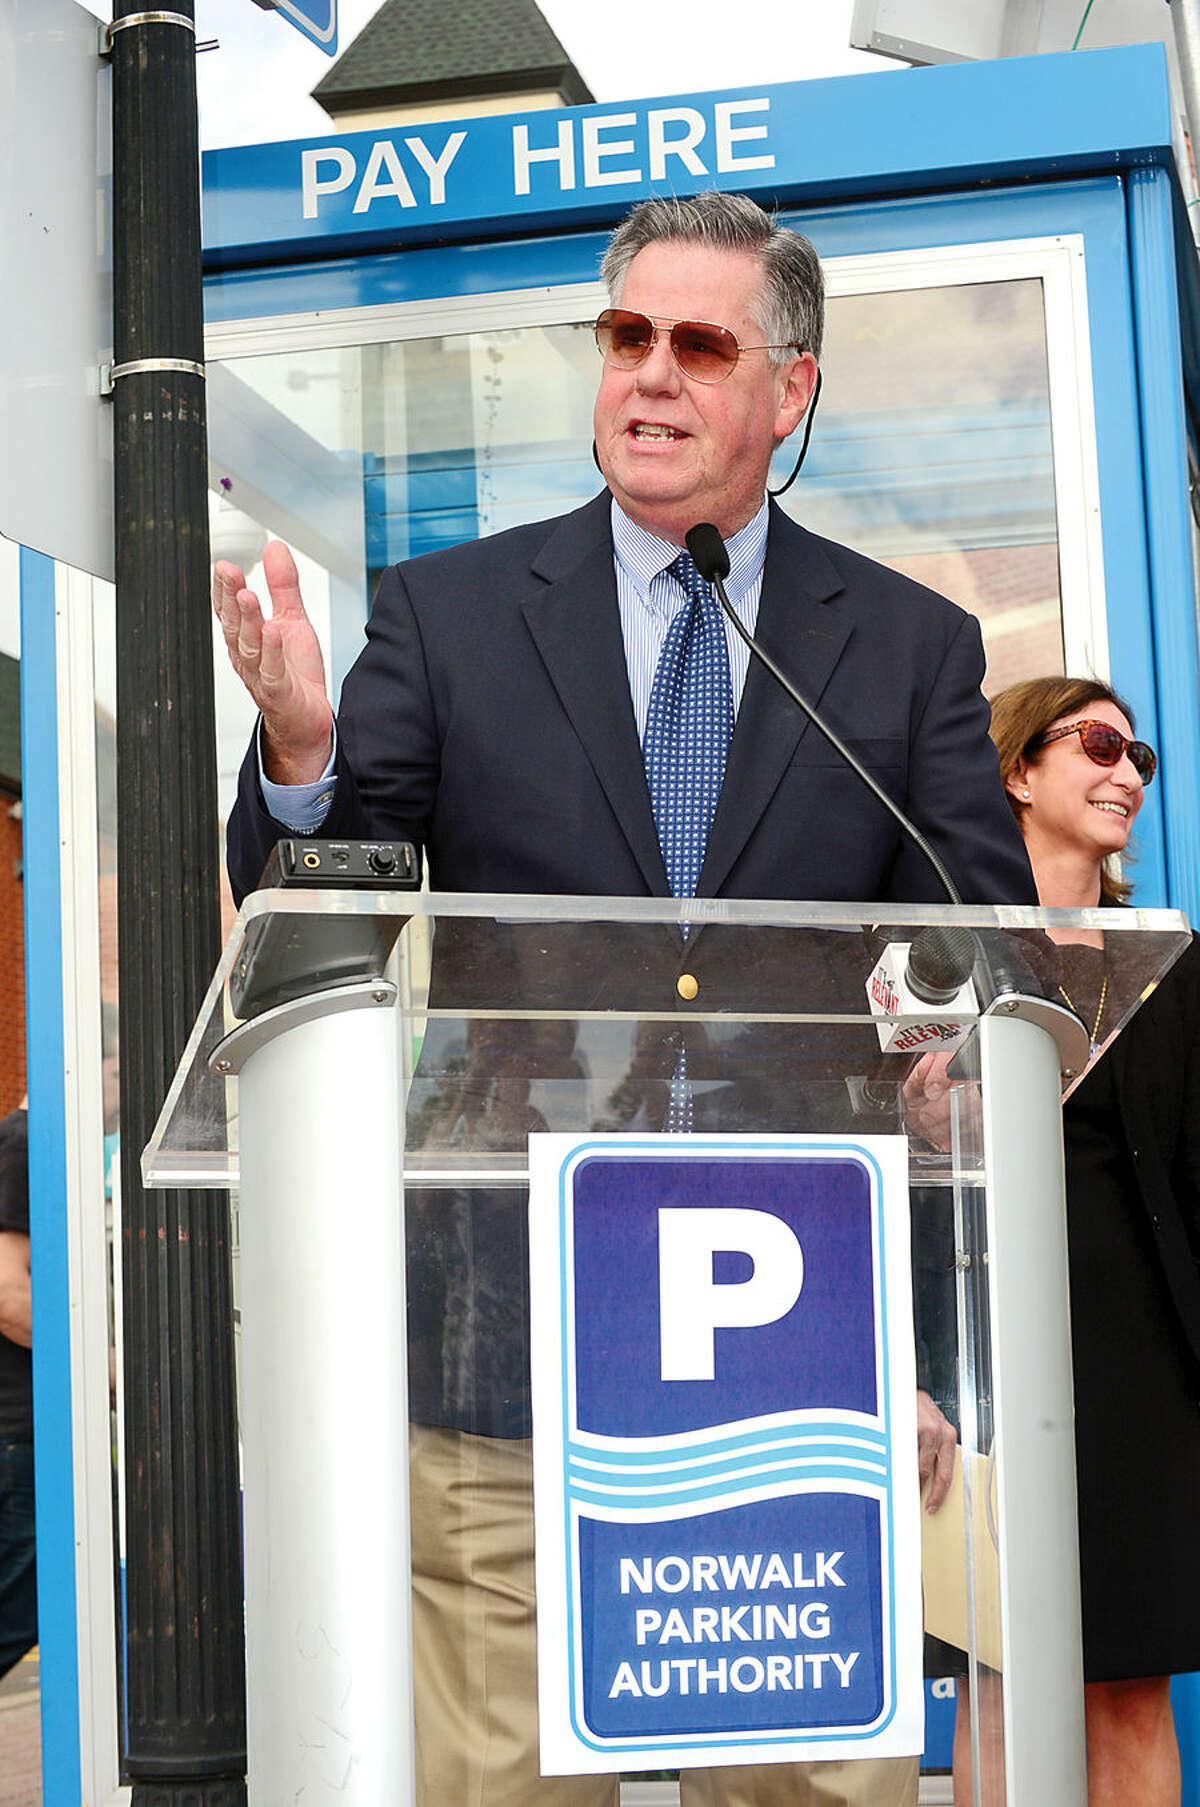 Hour photo / Erik Trautmann Greater Norwalk Chamber of Commerce president Ed Musante speaks during a press conference at the North Water St lot Tuesday as the Norwalk Parking Authority announces a new digital initiative that allows access to parking availability information with the smart phone application, Parker. The system works via wireless sensors that are embedded in parking space to detect whether or not the space is occupied. Data from each sensor is relayed via wireless to the cloud and pushed into an easy-to-use app showing real-time parking availability. CASE parking, a parking data solutions provider, will collect occupancy data from the lots and garages. Streetline, the leading global provider of sensor-based smart parking technology, has outfitted the on-street parking spaces with sensors. The data from both systems will be streamed directly into Streetline's mobile app, Parker.